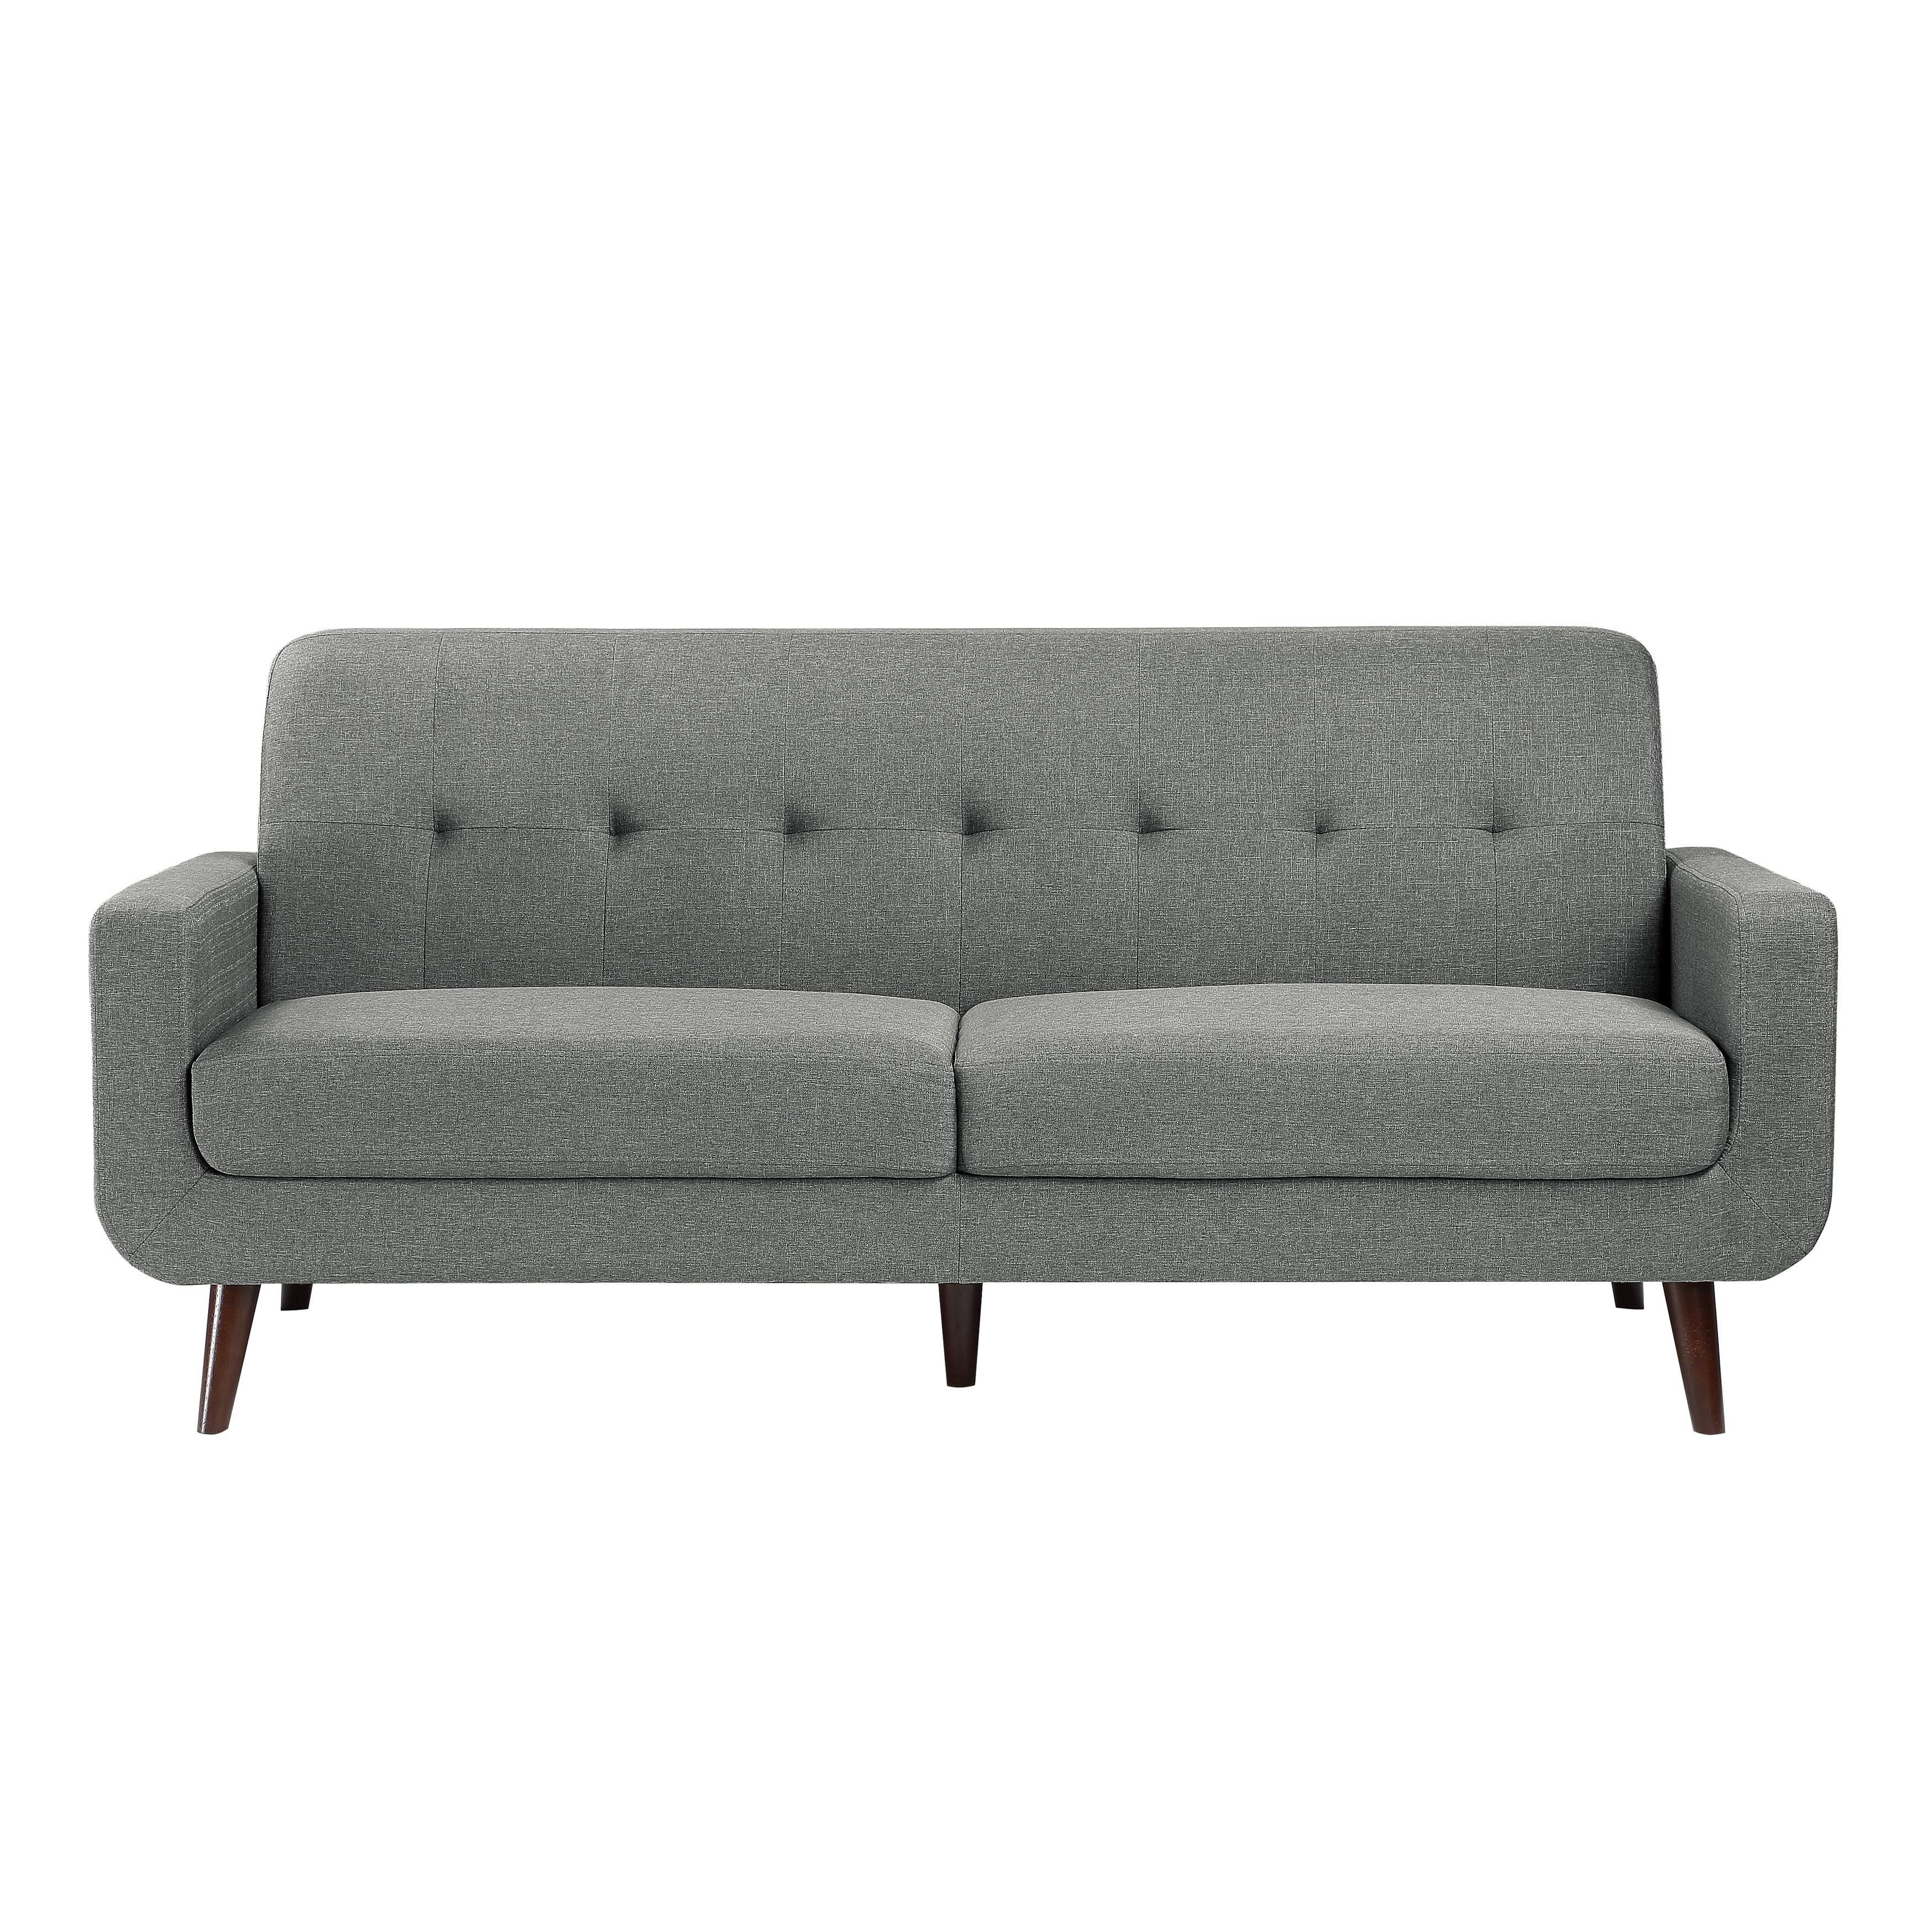 Homelegance 9433GY-3 Fitch Sofa